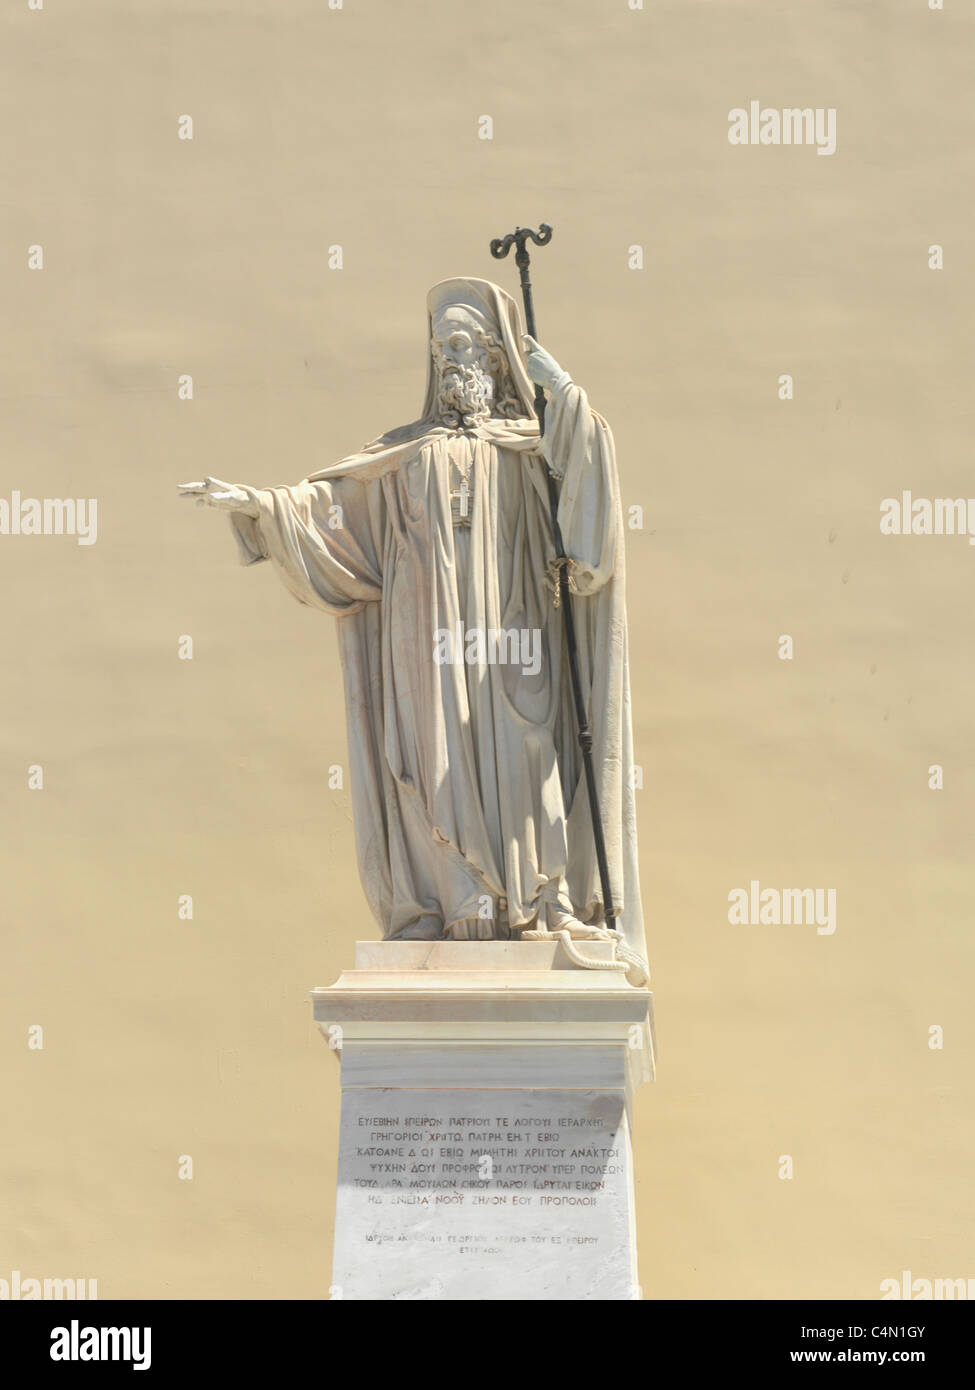 Athens Greece Athens University Statue Of Patriarch Grigorios V (Gregory The 5th) Stock Photo